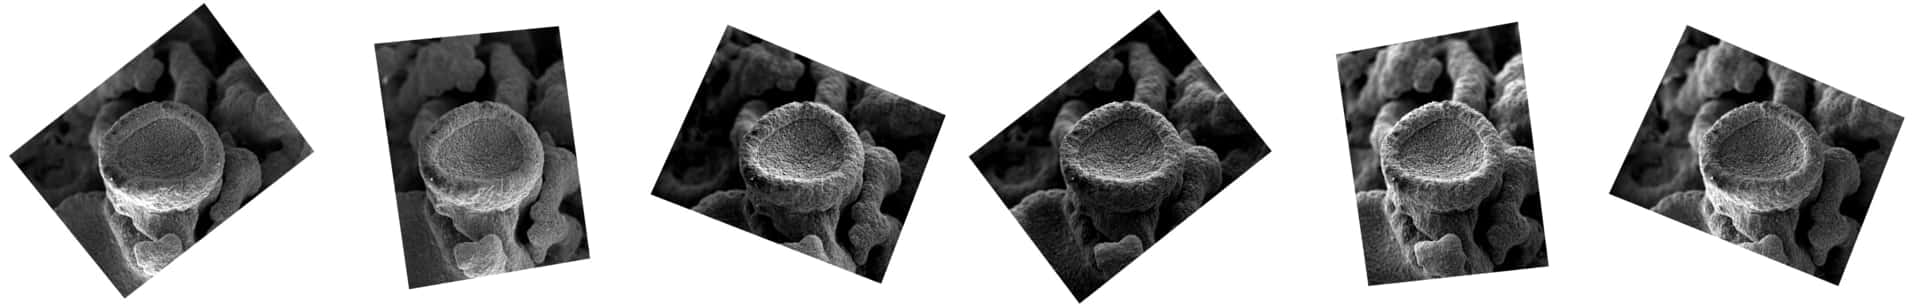 scanning electron microscope images of lichen from several angles, rotated to align as an image stack